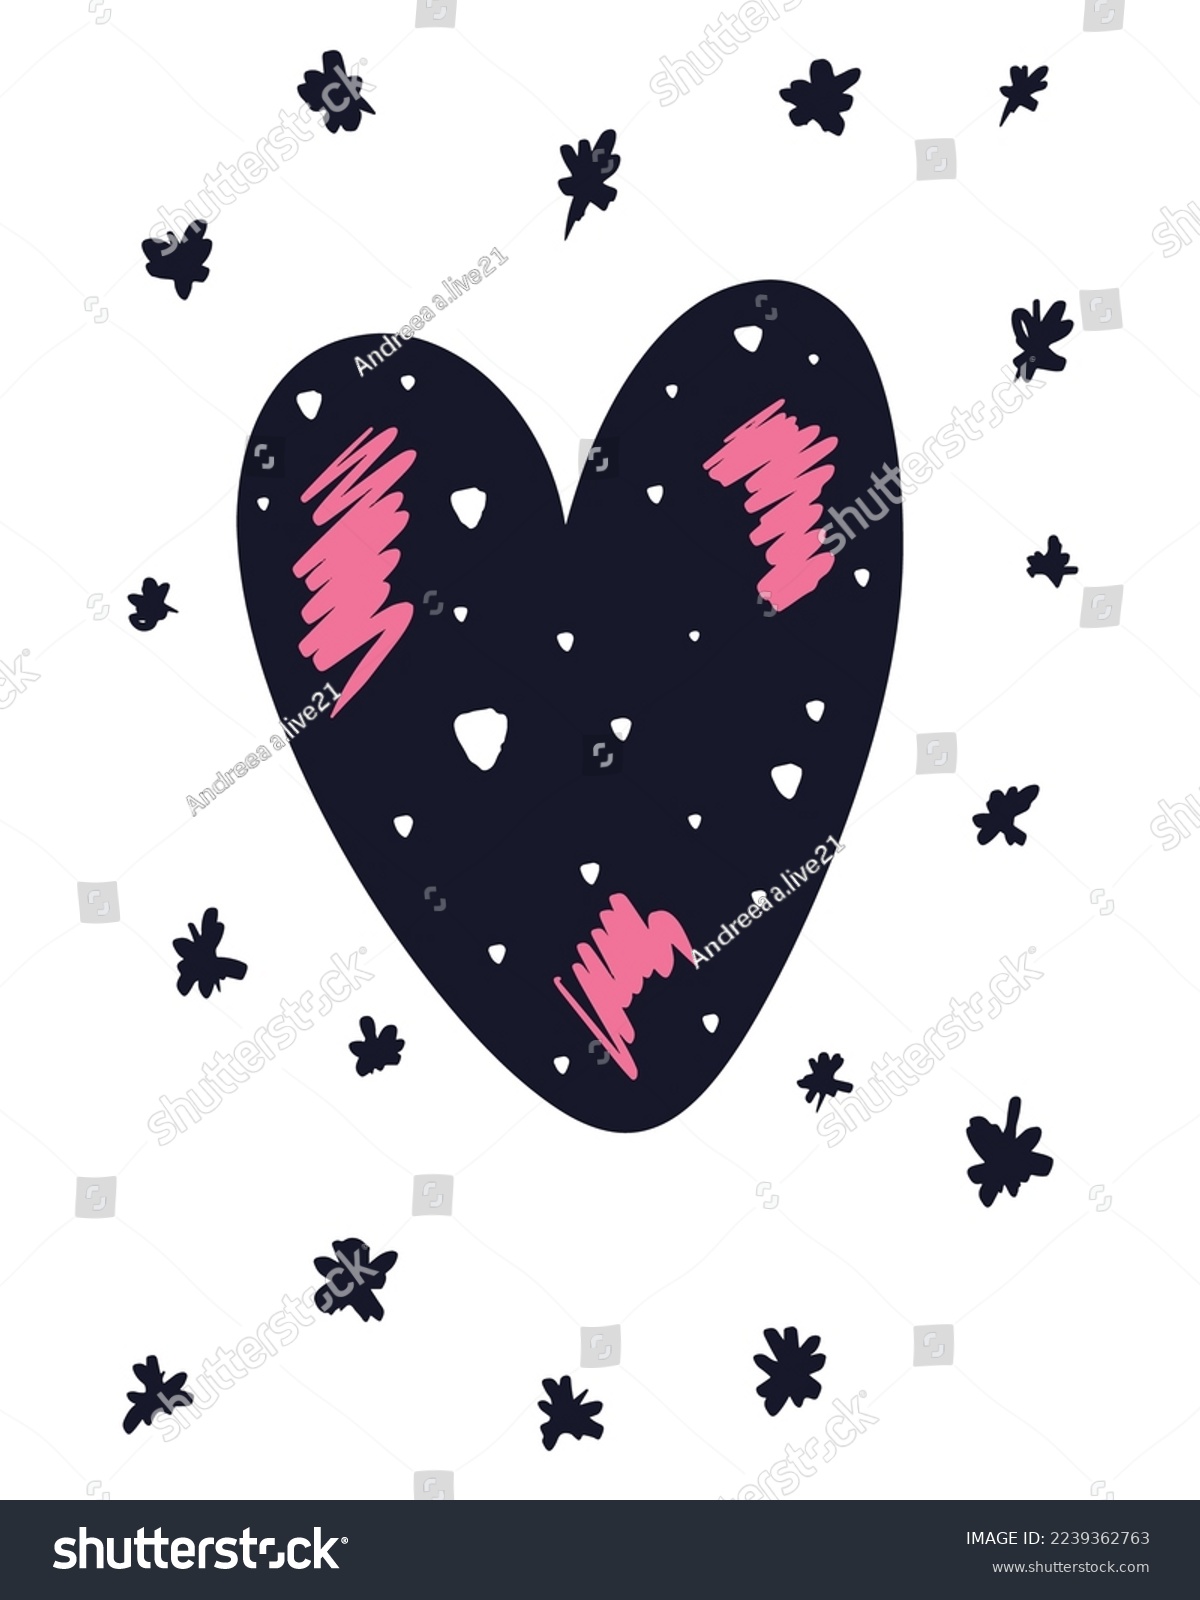 SVG of Valentine's Day Vector SVG, Doodle Hearts Illustration, Hearts Vectors, Love Illustration, Pink Black Painted Hearts Illustration, Abstract Black Hearts, Abstract Love Pattern svg